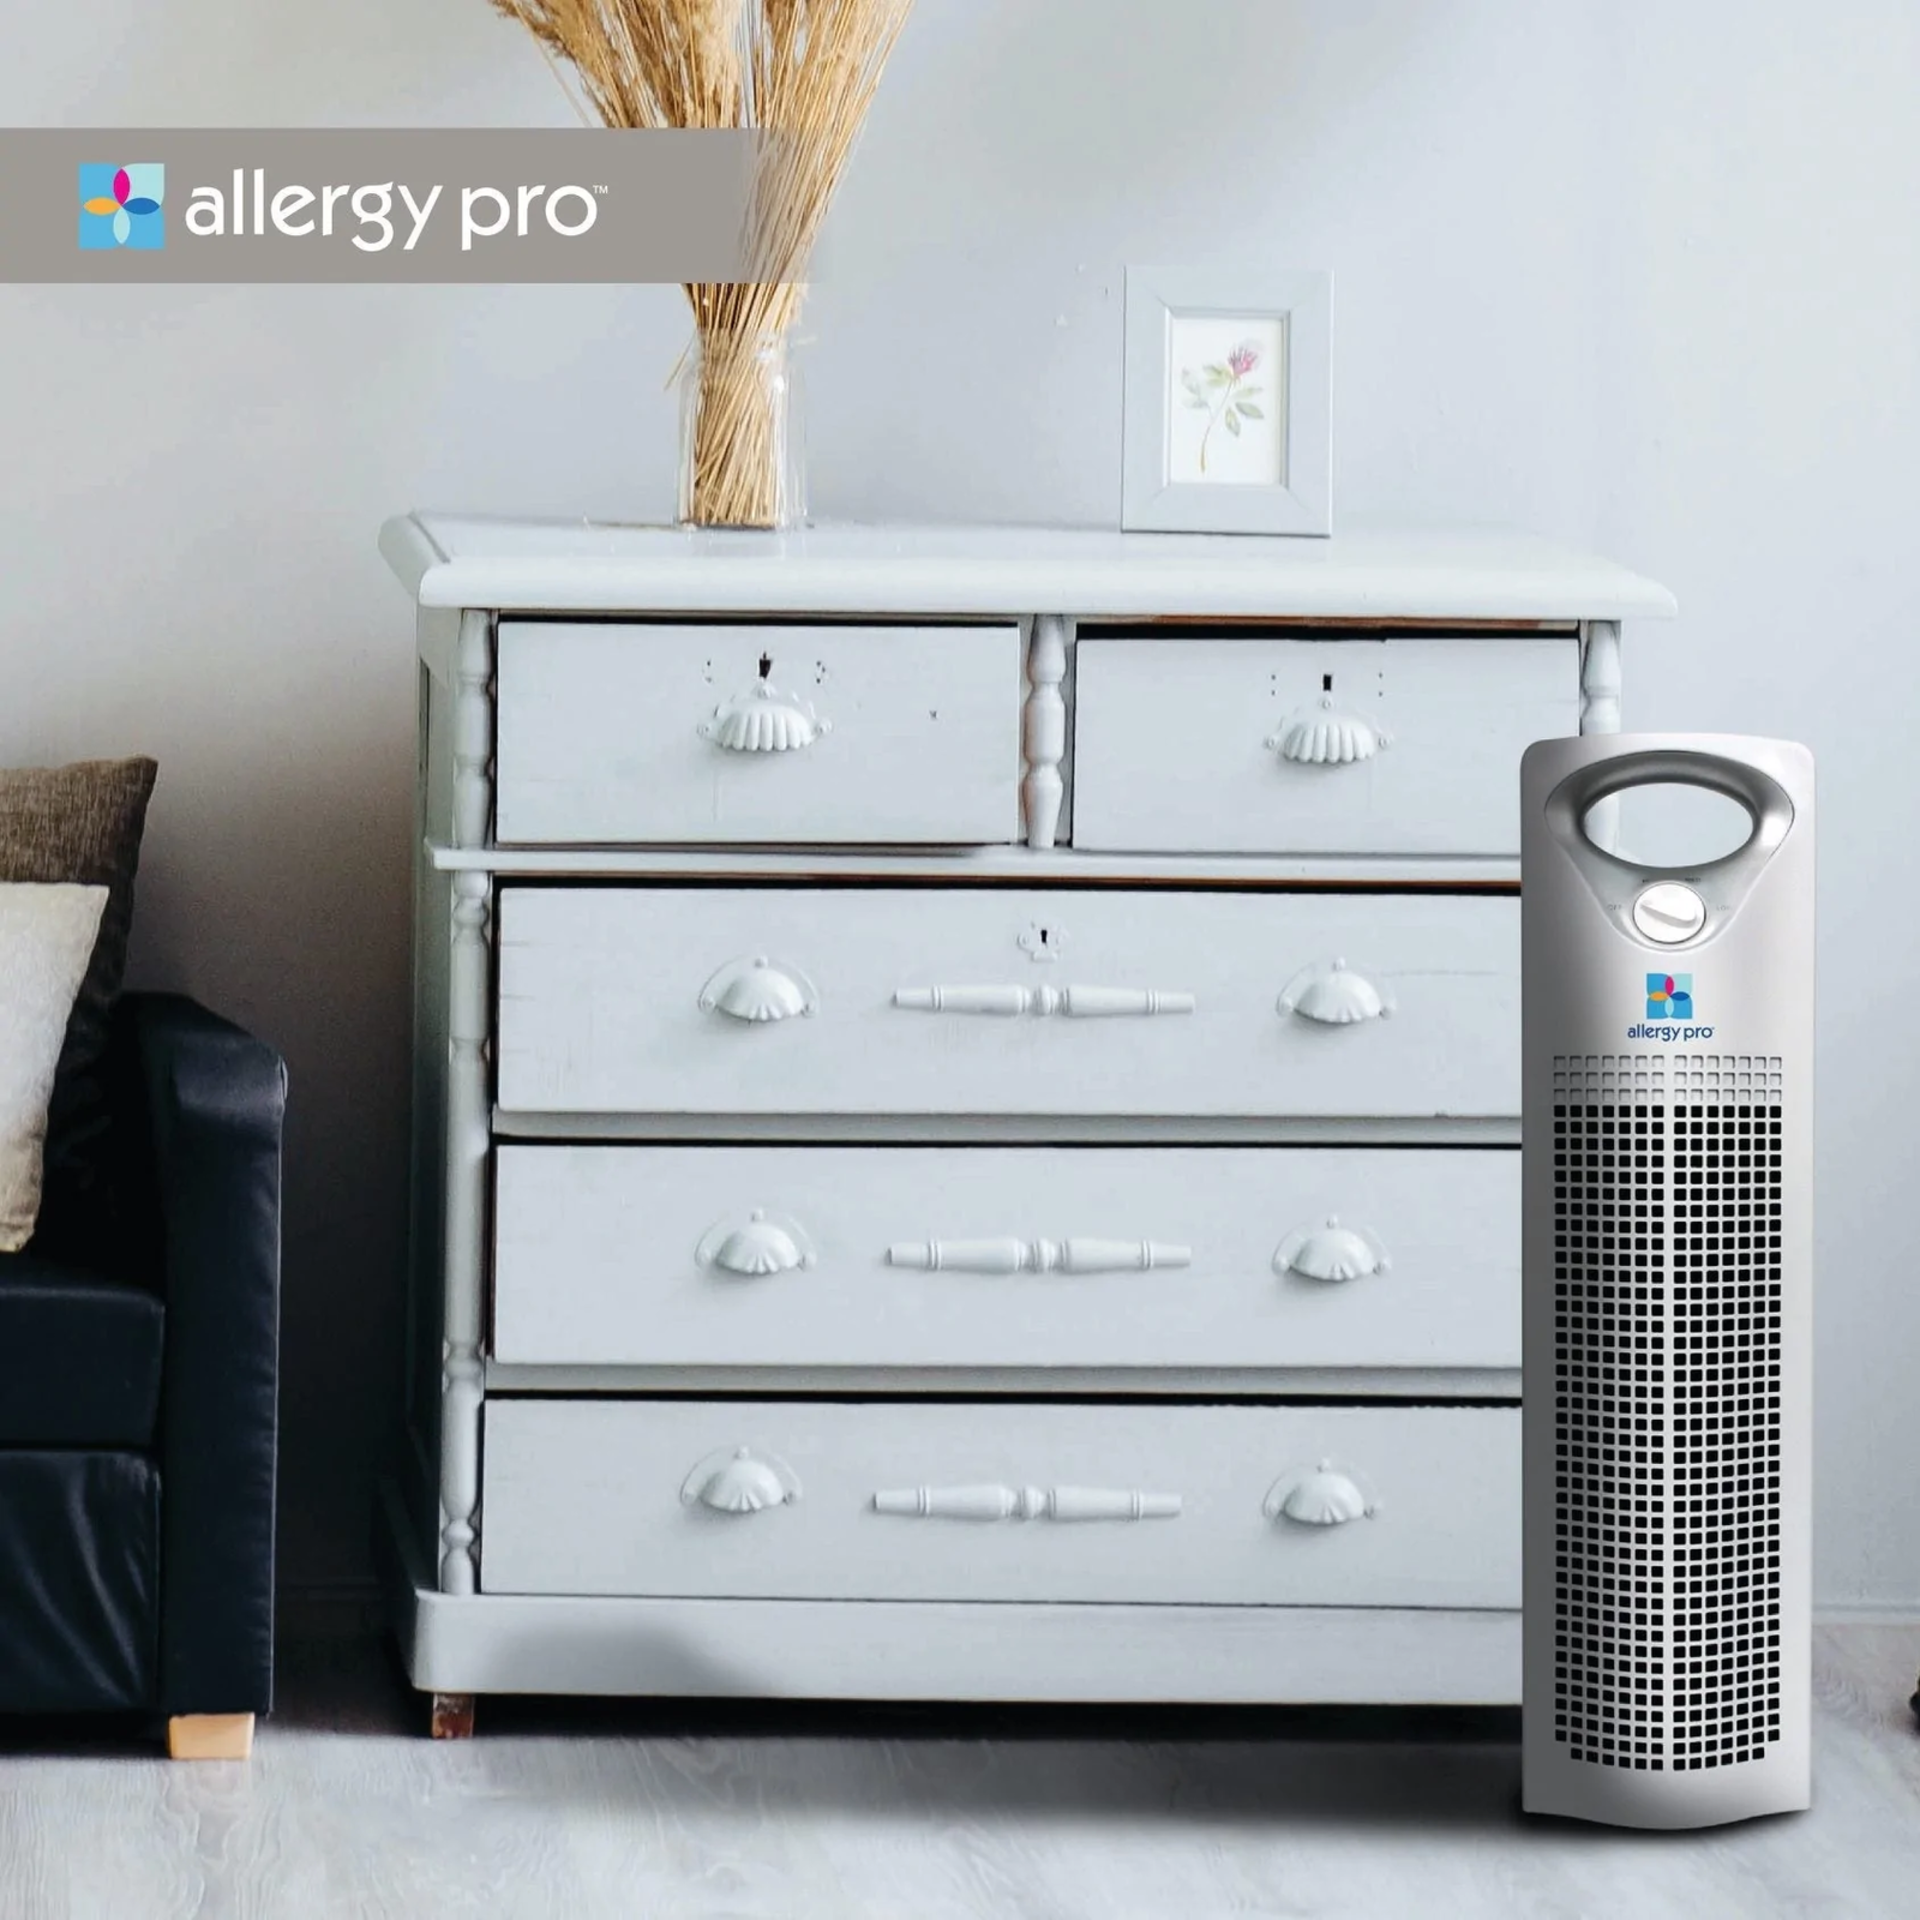 Pallet To Include 8 x Brand New Boneco Envion AP200 Allergy Pro™ Air Purifier RRP £199, - Image 2 of 2